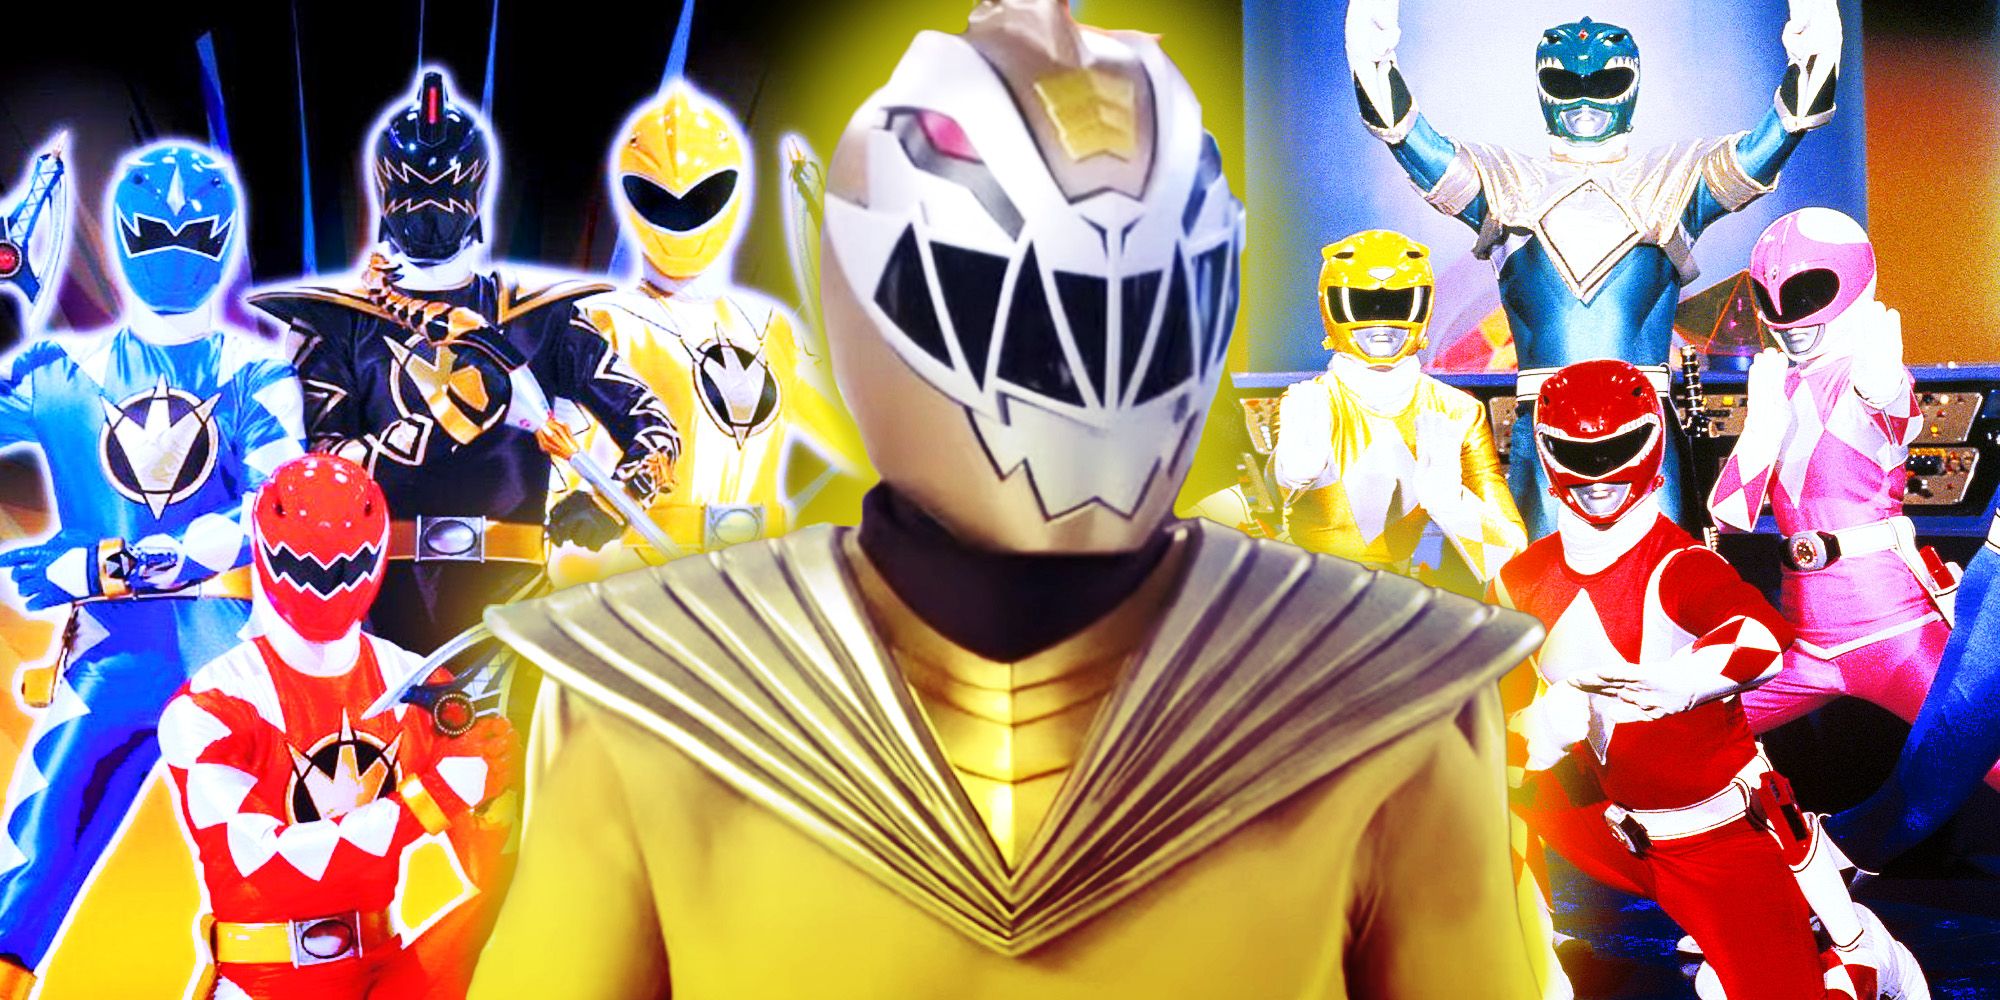 The Dino Thunder Rangers, the Cosmic Fury Zenith Ranger, and the Mighty Morphin Power Rangers